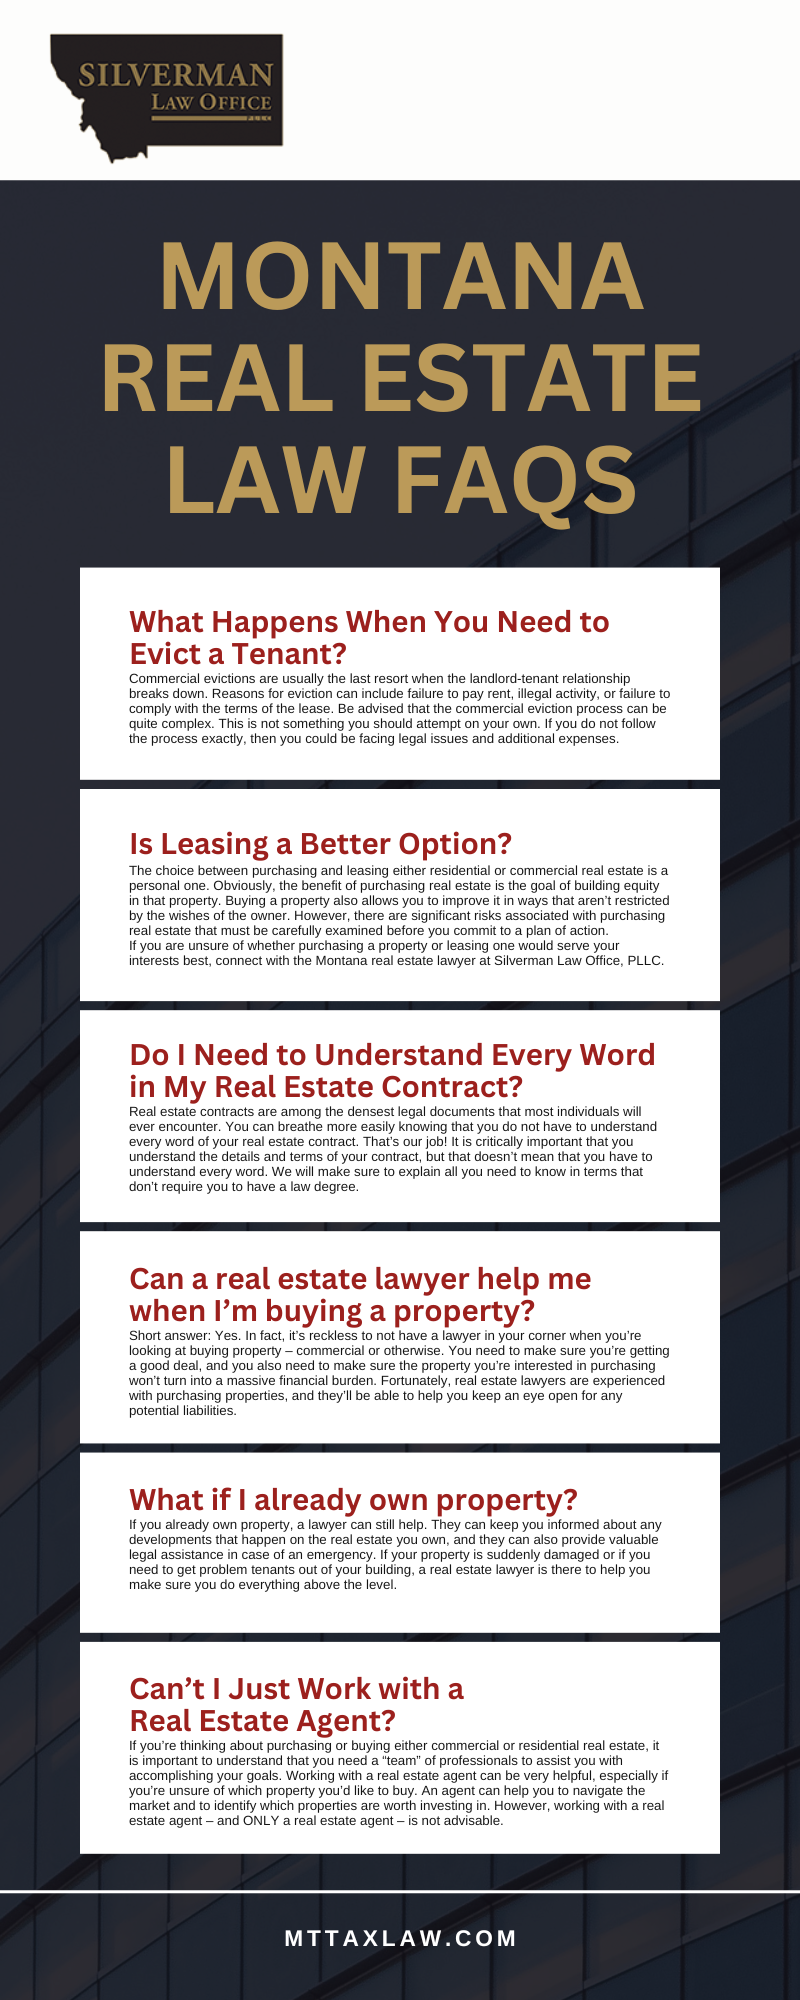 Montana Real Estate Law FAQs Infographic